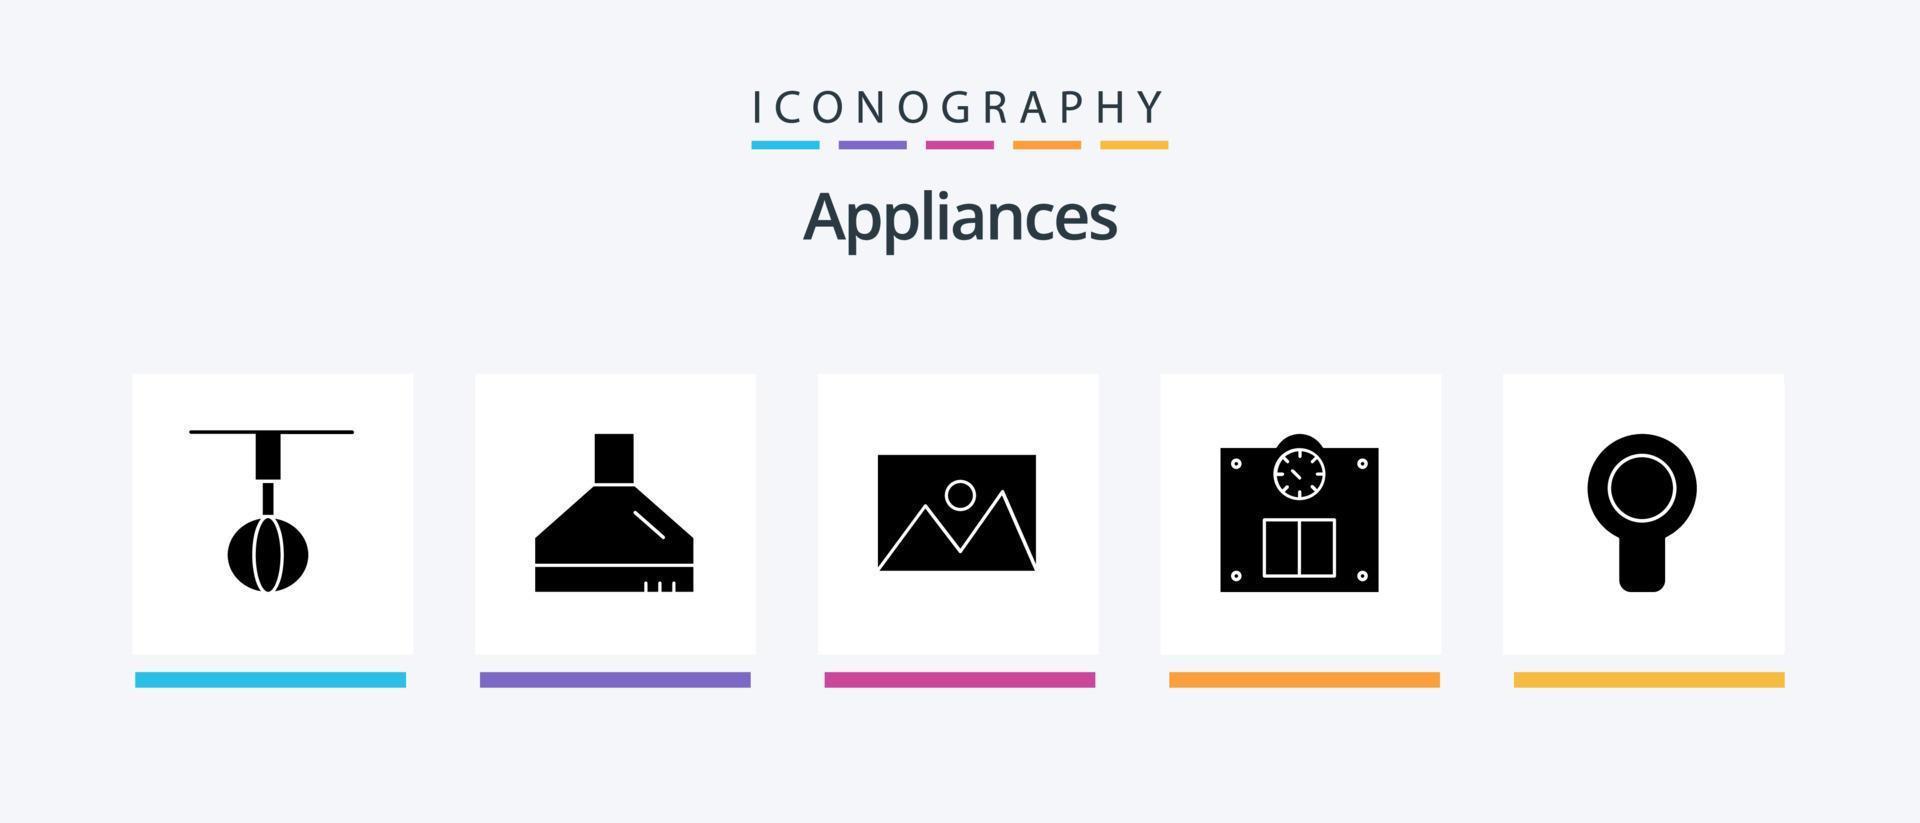 Appliances Glyph 5 Icon Pack Including cool. weight. appliances. scales. photo. Creative Icons Design vector